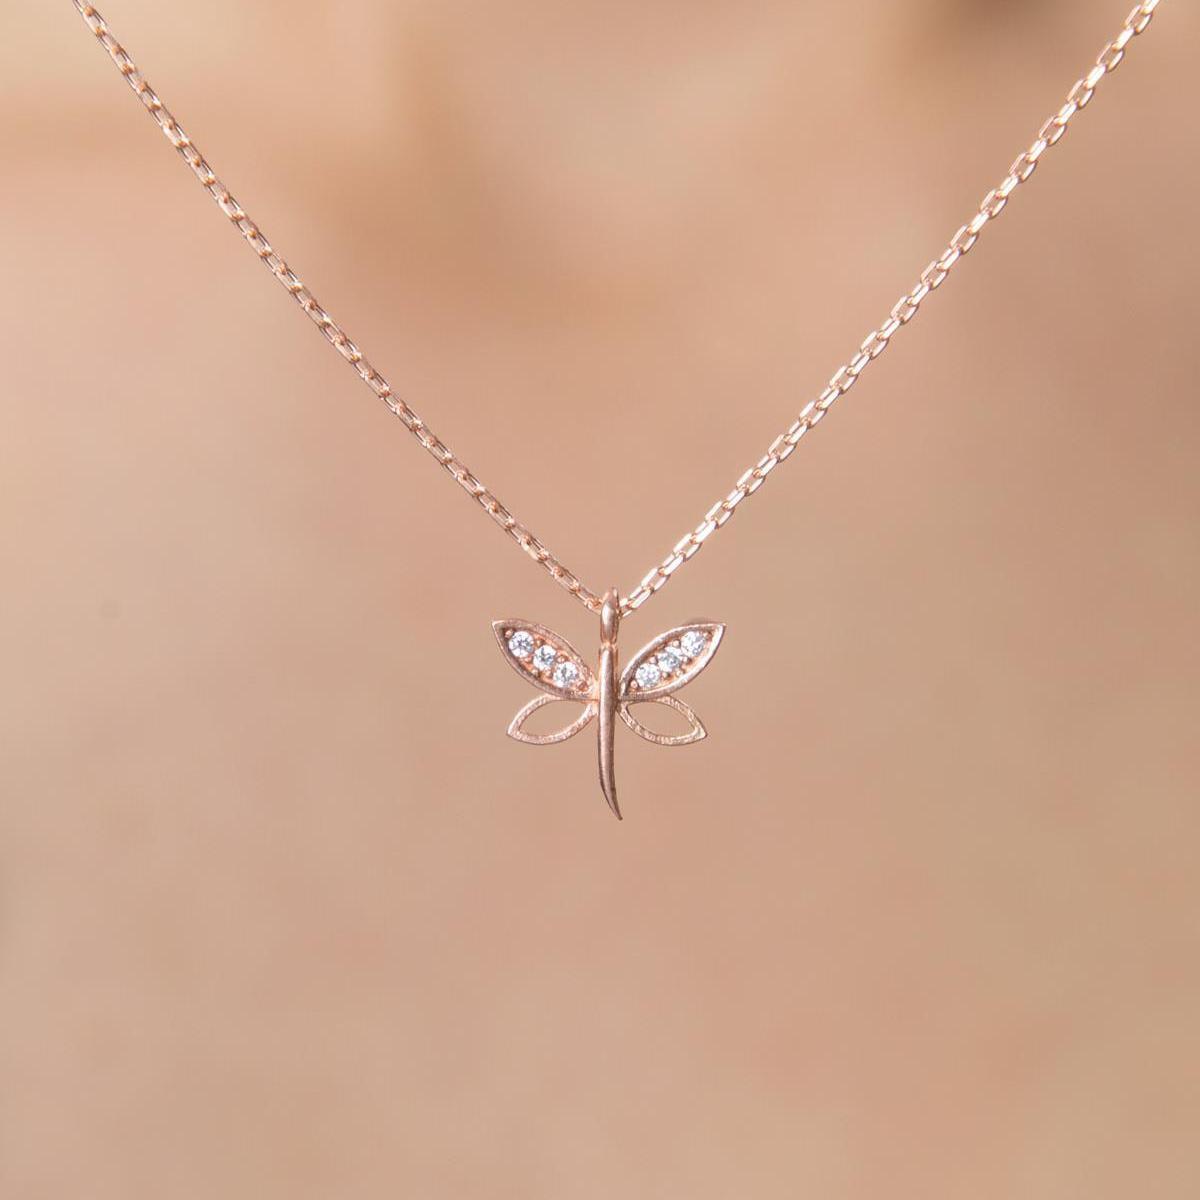 Dragonfly Diamond Necklace • Dragonfly Pendant Necklace • Gift For Her - Trending Silver Gifts